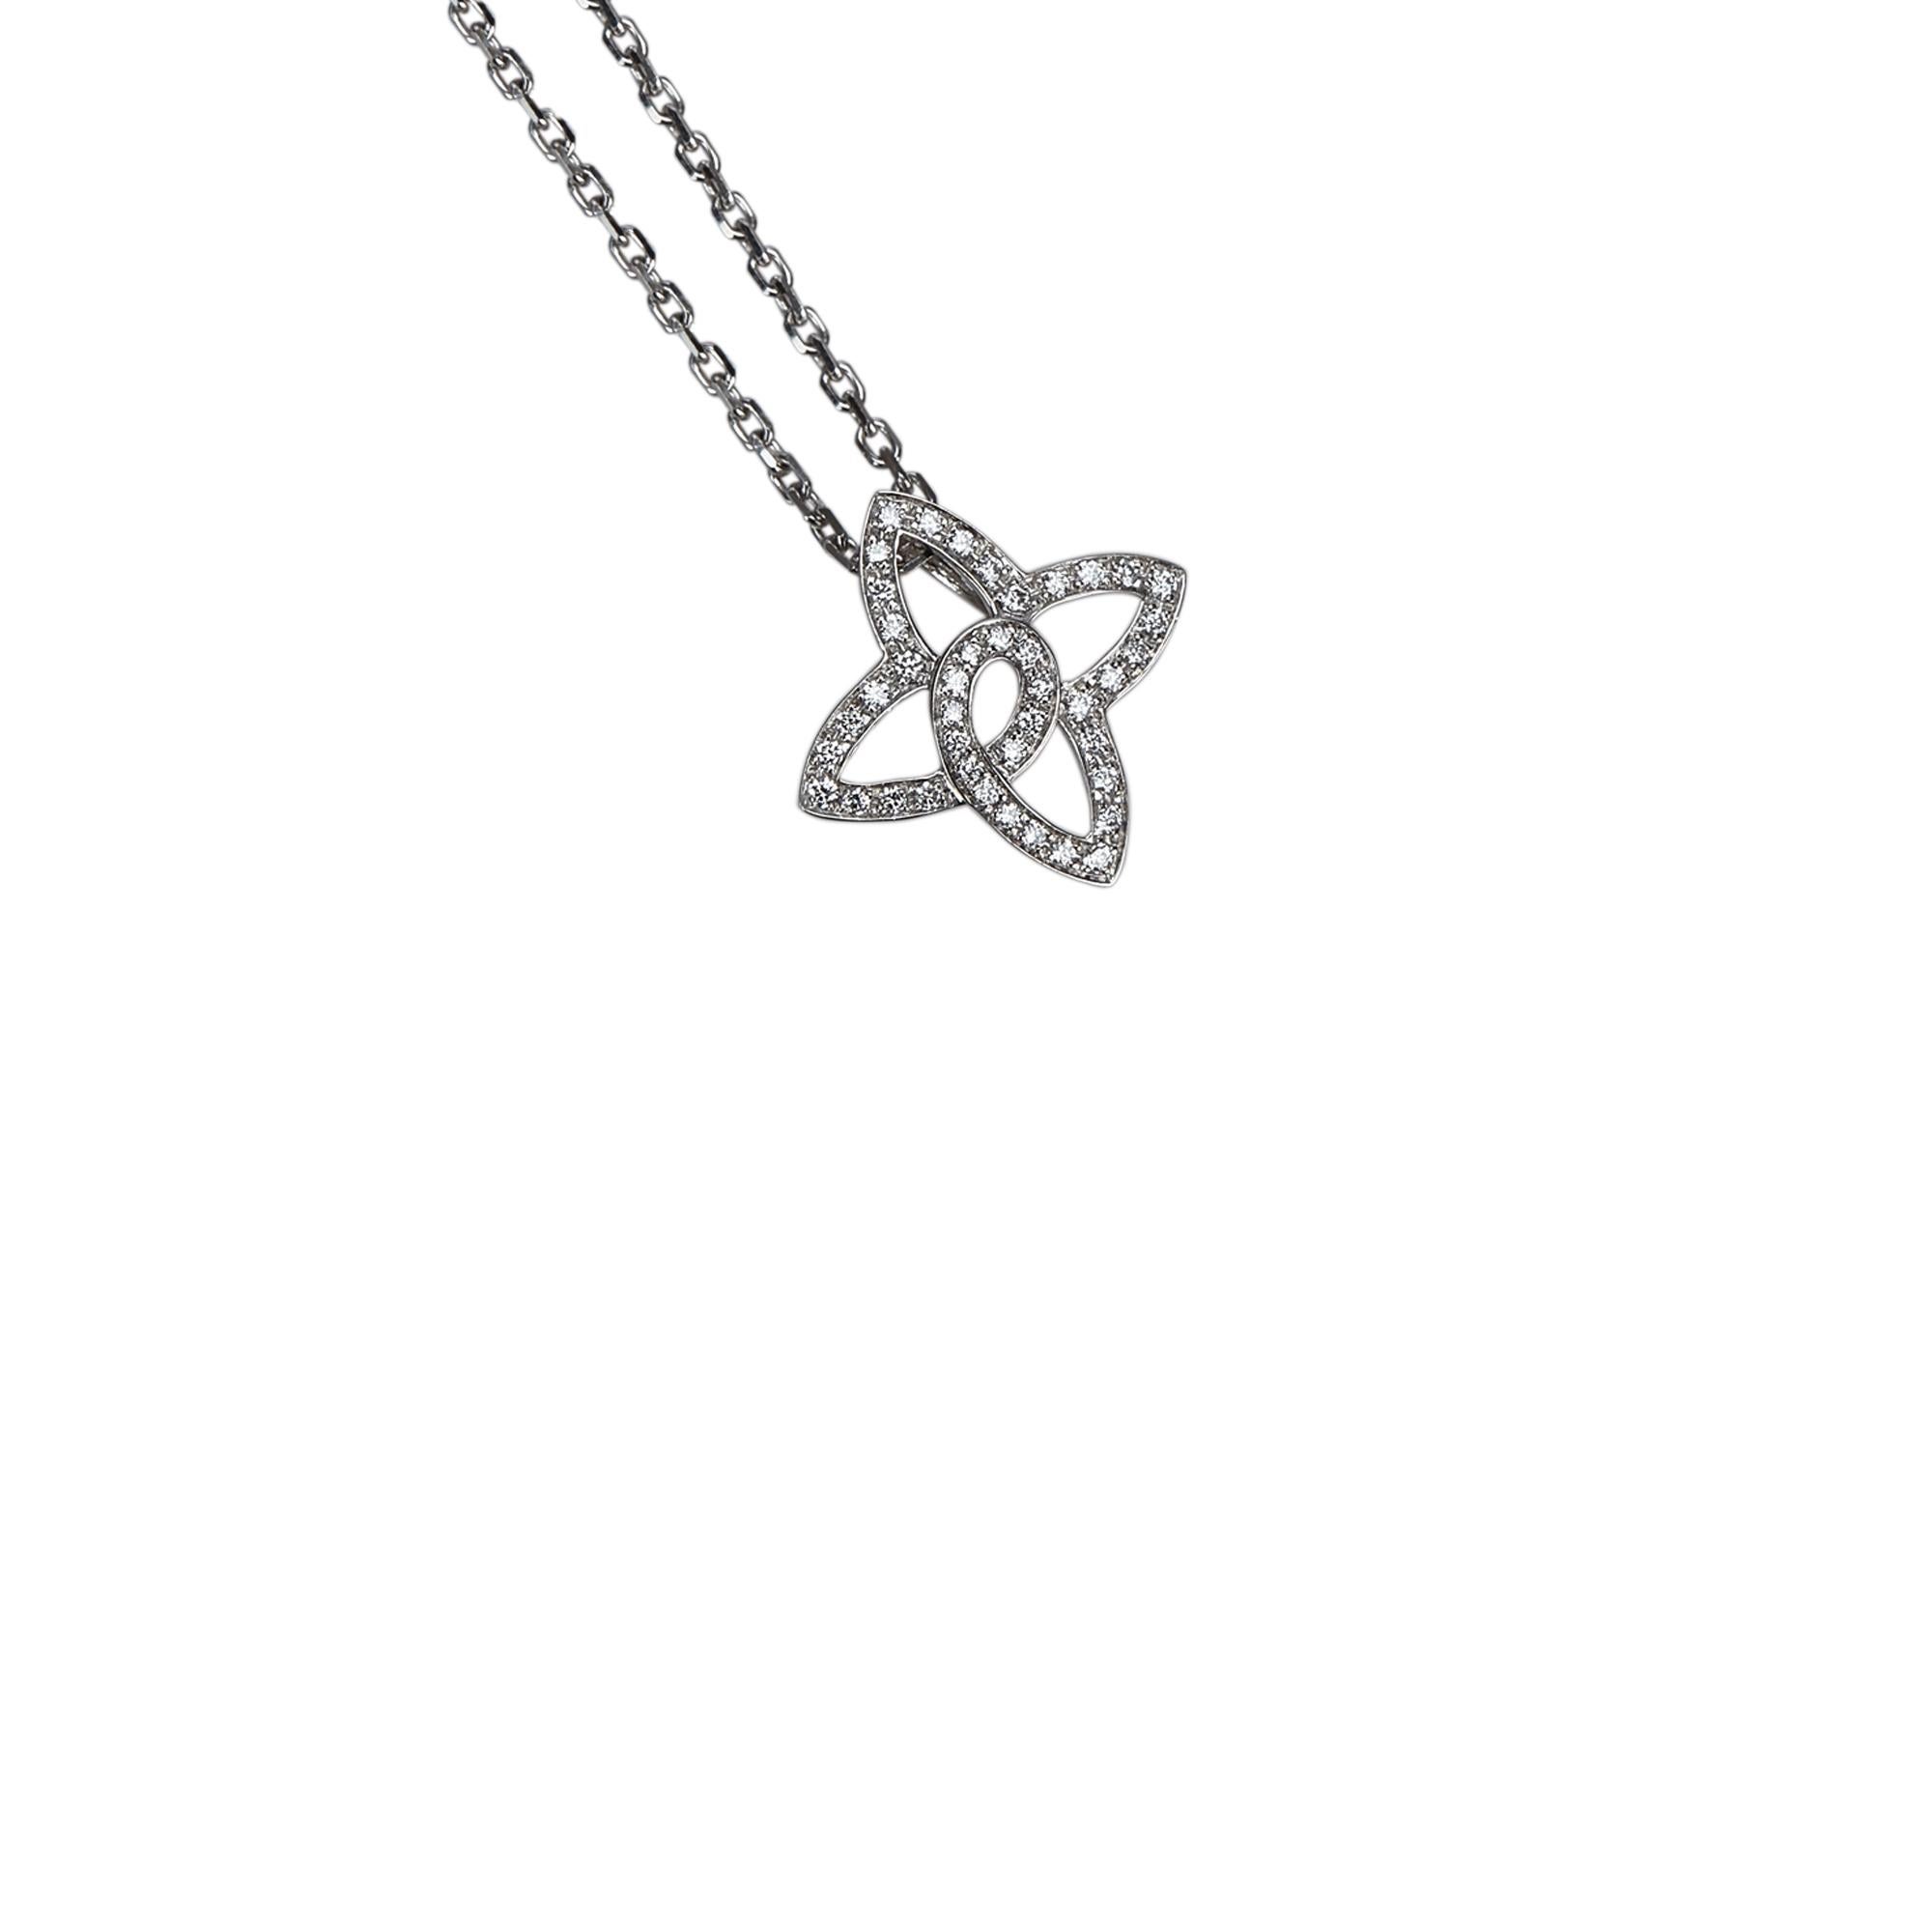 This necklace features a diamond set in an 18K white gold quatrefoil pendant, silver-tone neck chain, and a lobster closure. Weight 6.0 g. It carries as AB condition rating.

Inclusions: 
Box


Louis Vuitton pieces do not come with an authenticity